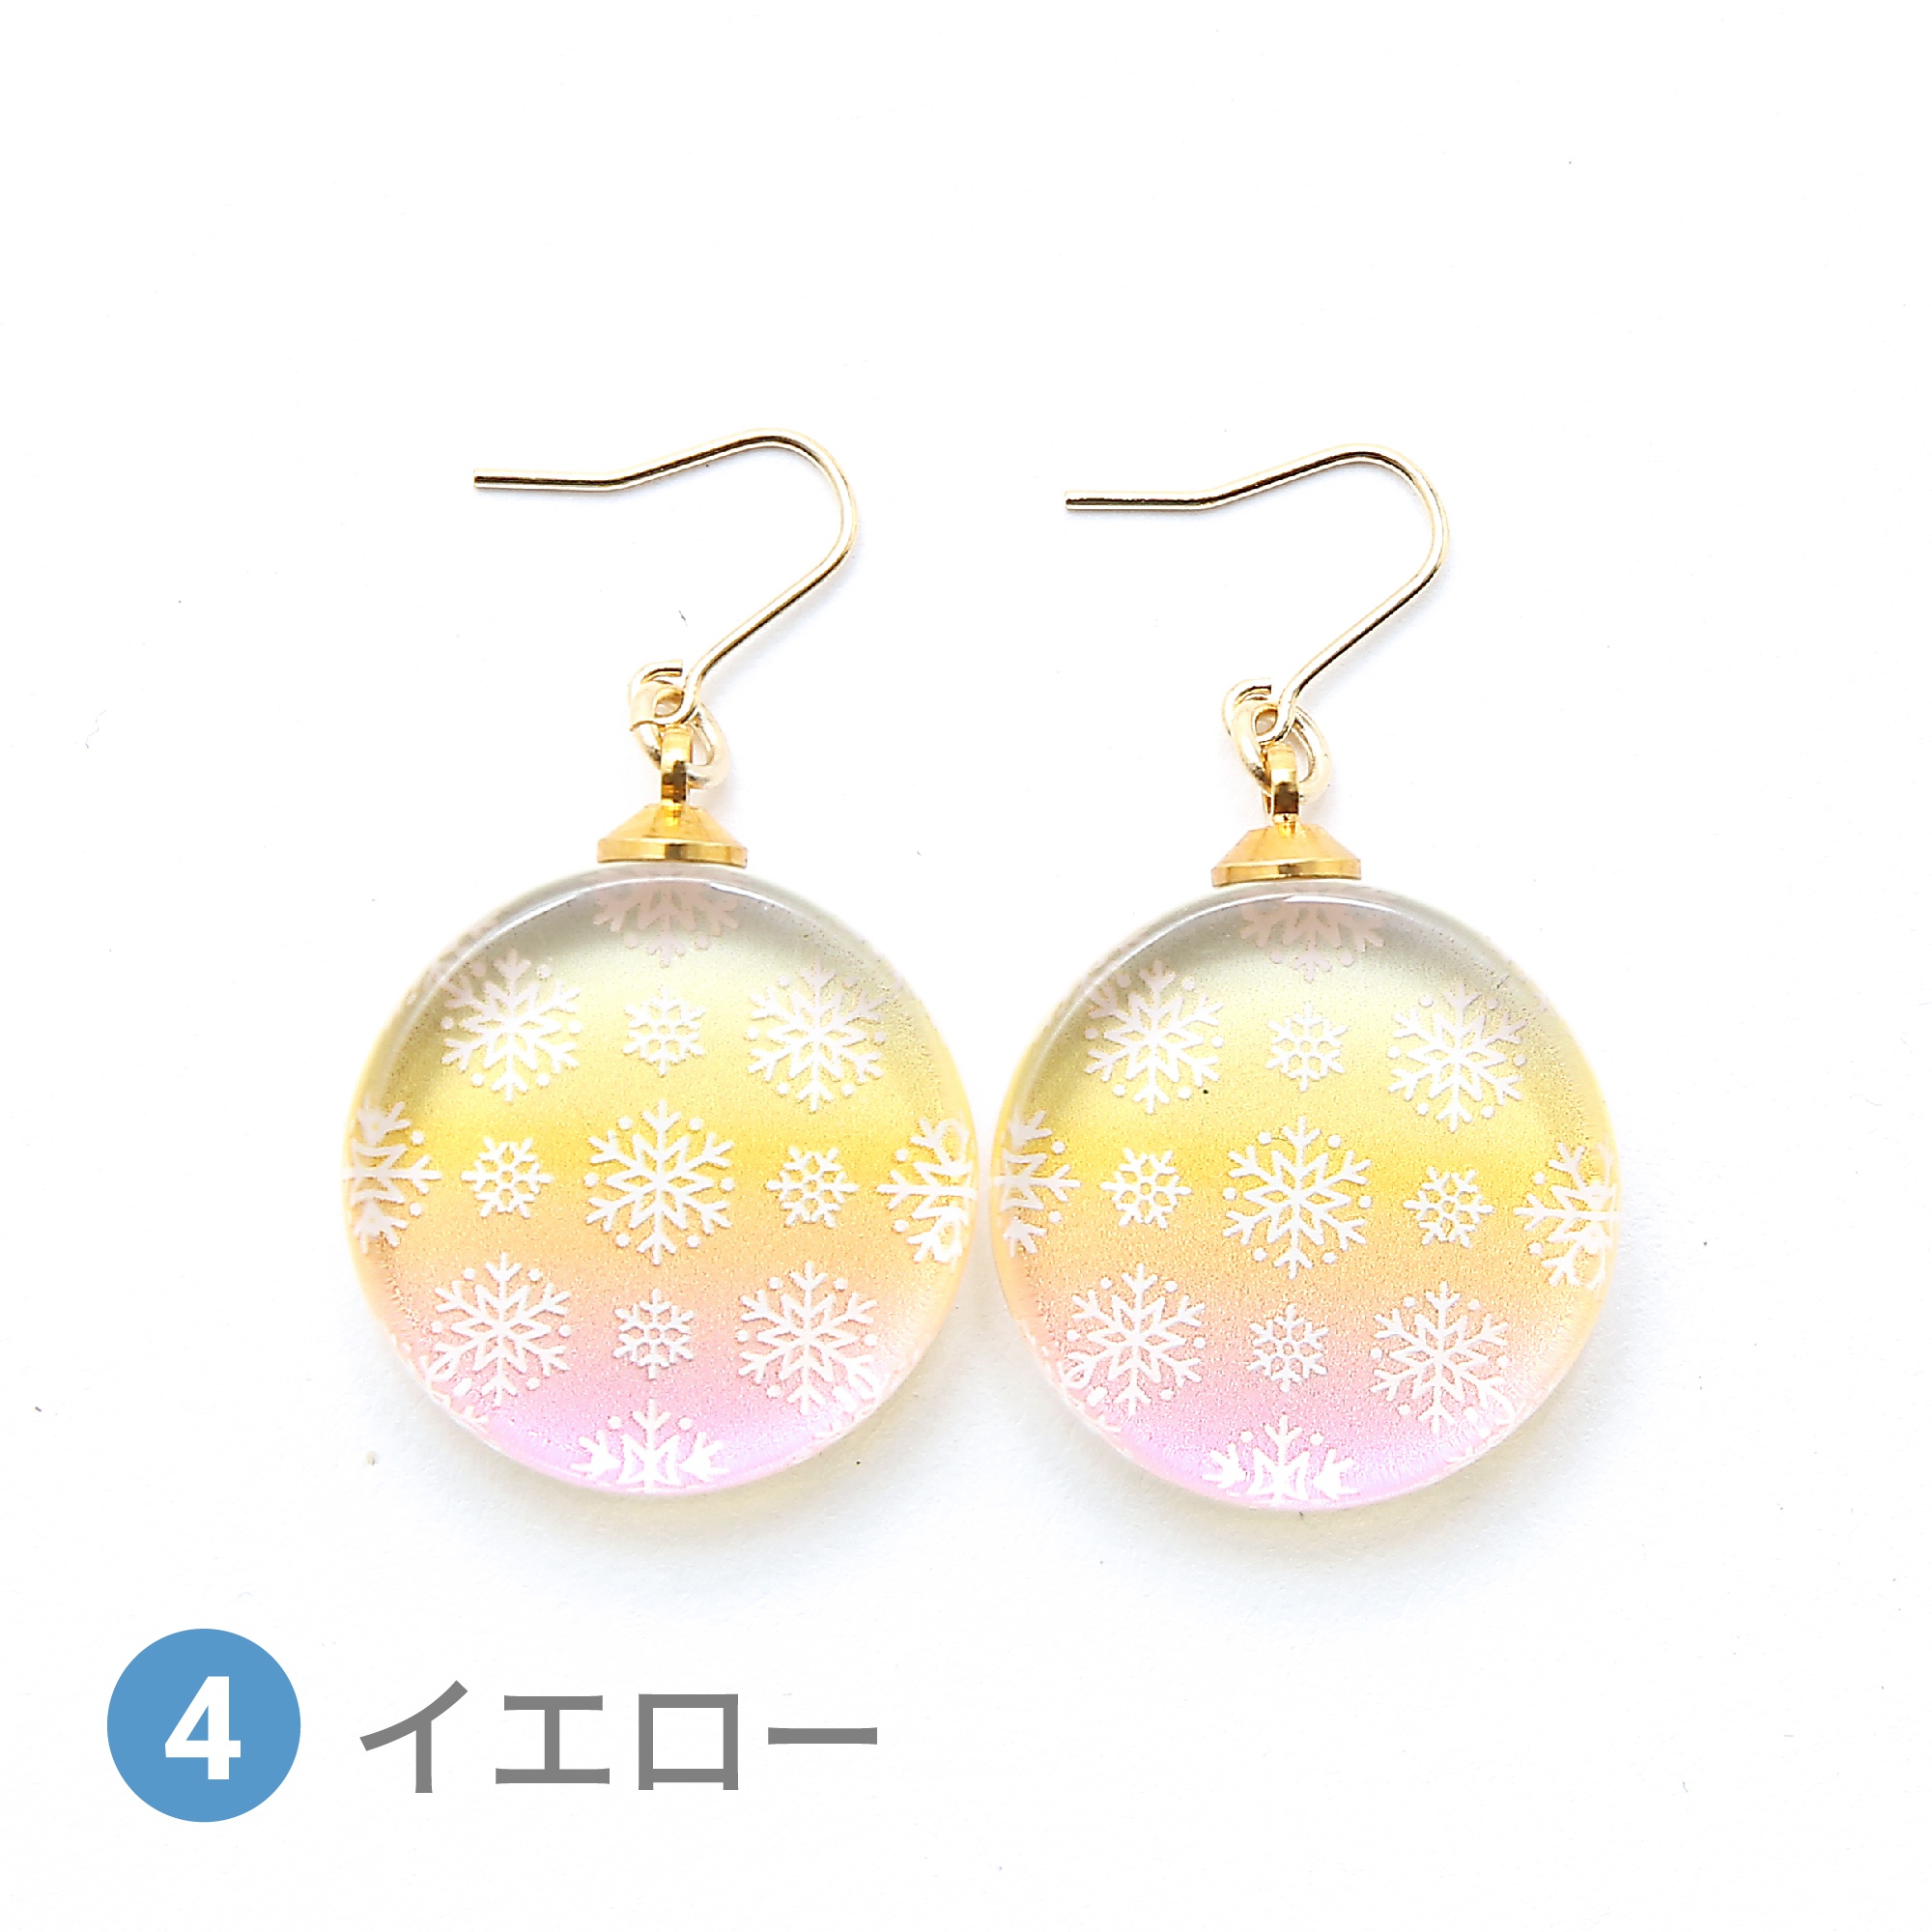 Glass accessories Pierced Earring snow flake yellow round shape